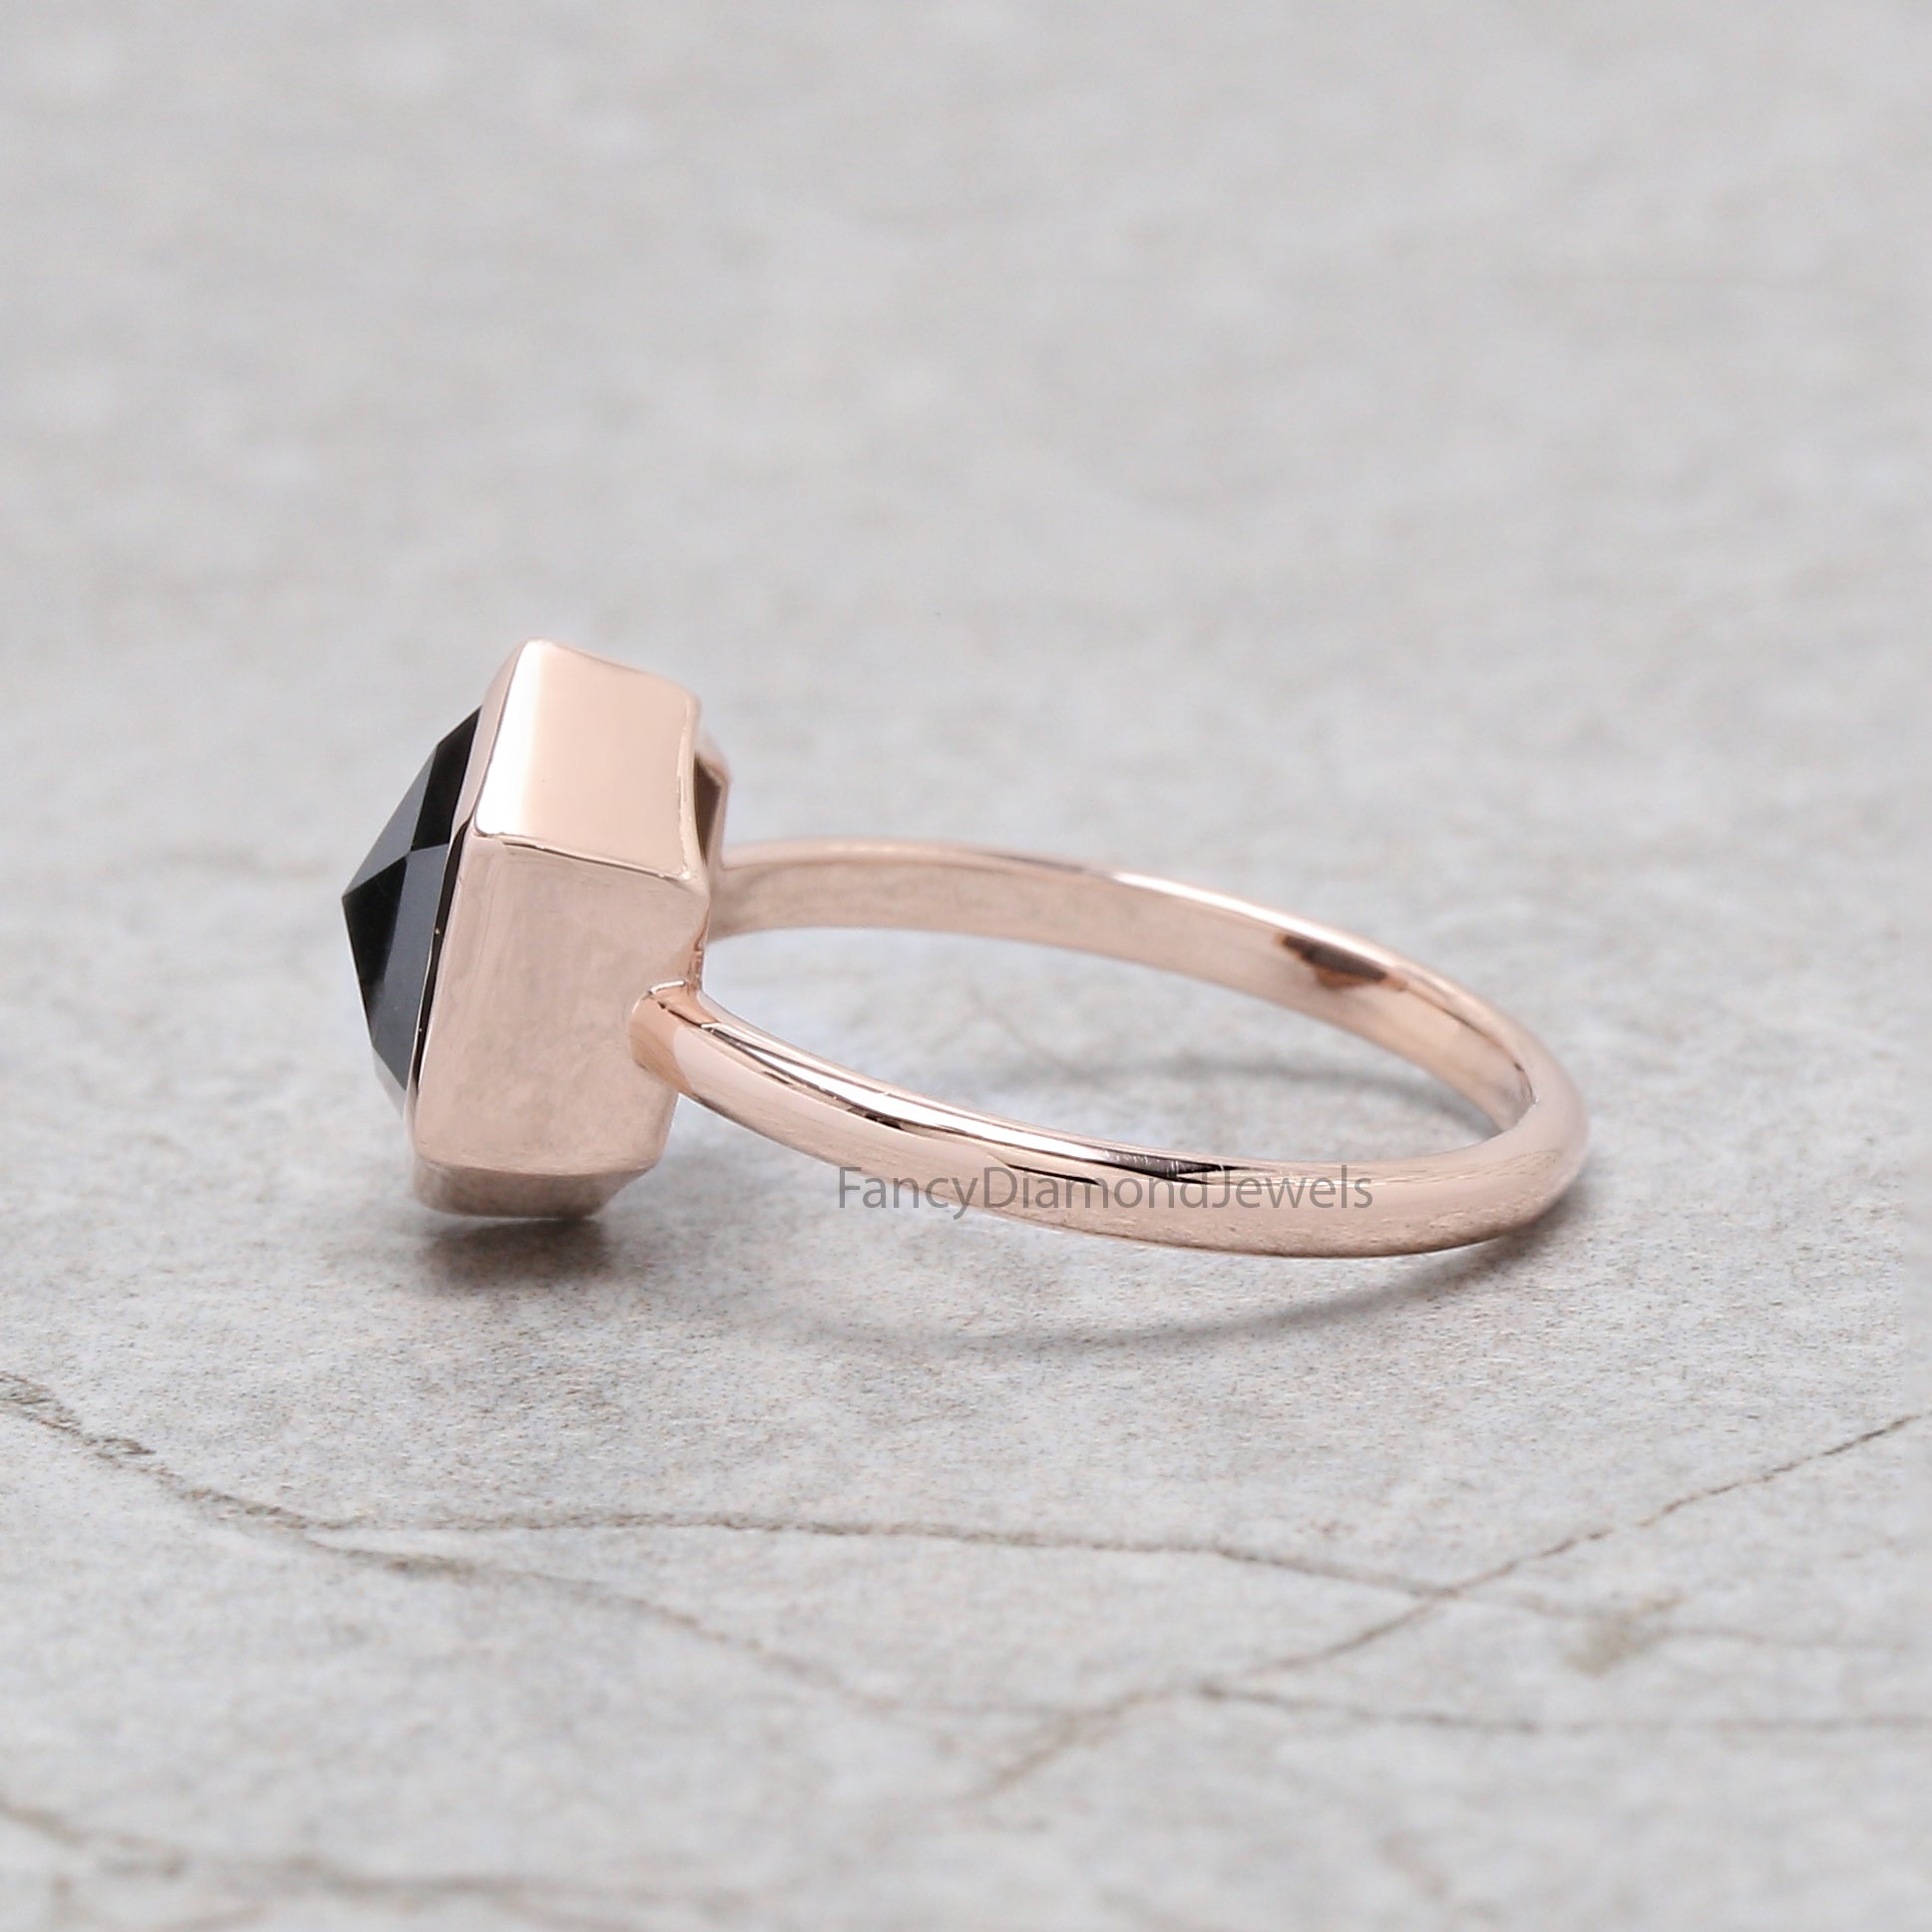 Hexagon Cut Black Color Diamond Ring 3.11 Ct 10.00 MM Hexagon Diamond Ring 14K Solid Rose Gold Silver Engagement Ring Gift For Her QN607